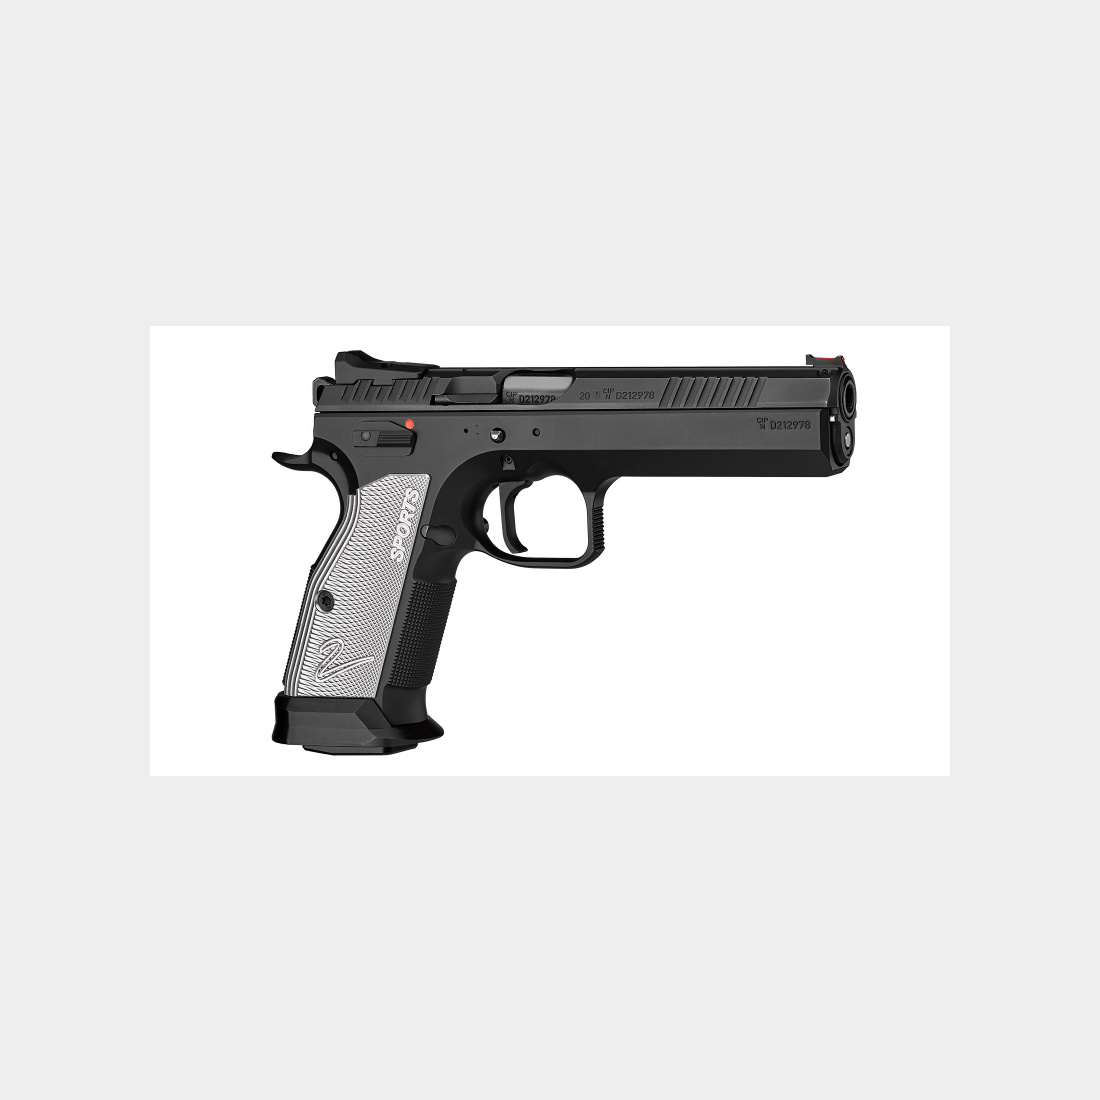 CZ 75 TS2 Entry Model 9mm Luger